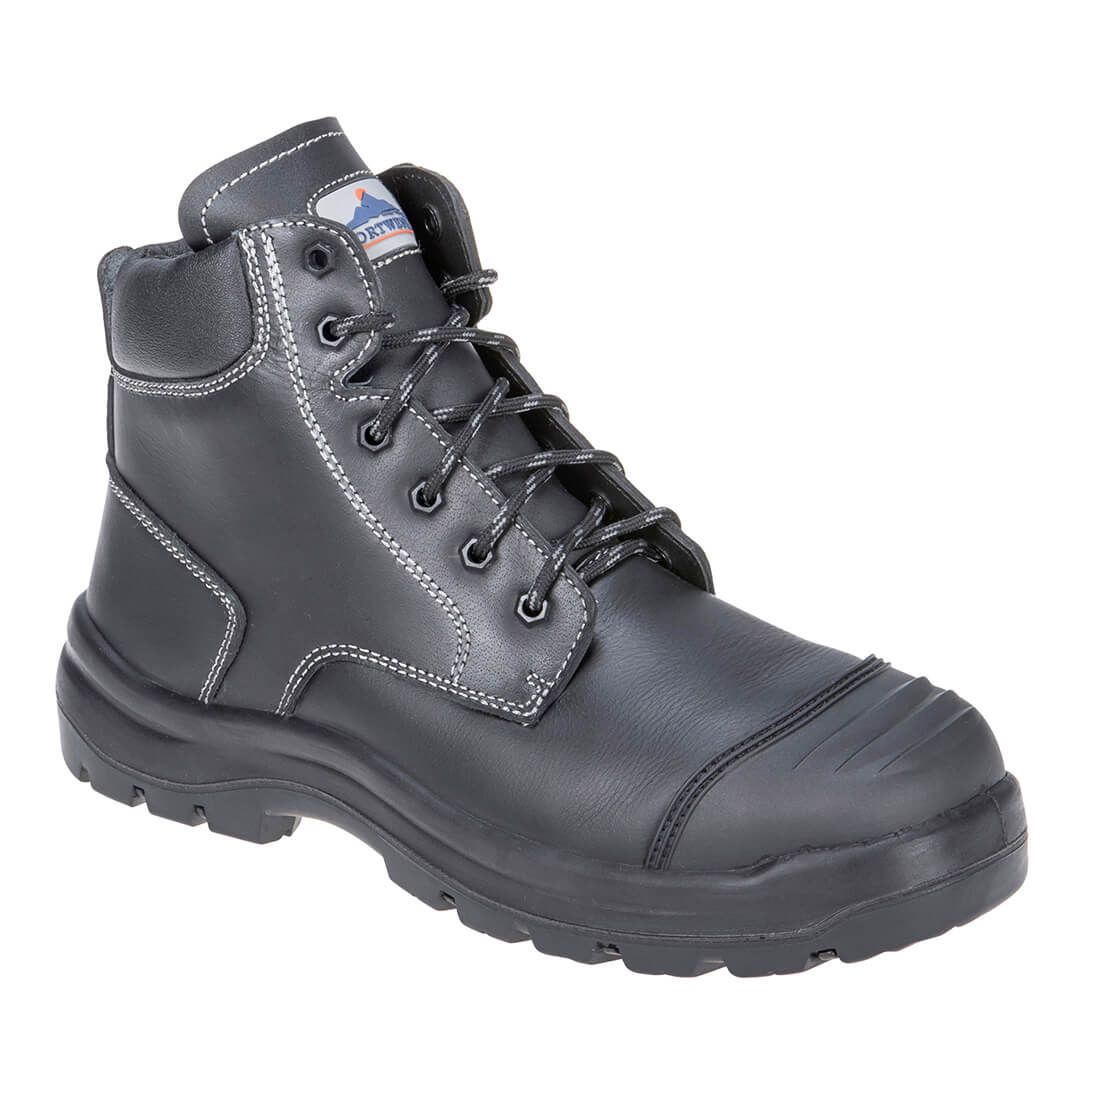 Image of Portwest Mens Clyde Safety Boots Black Size 11